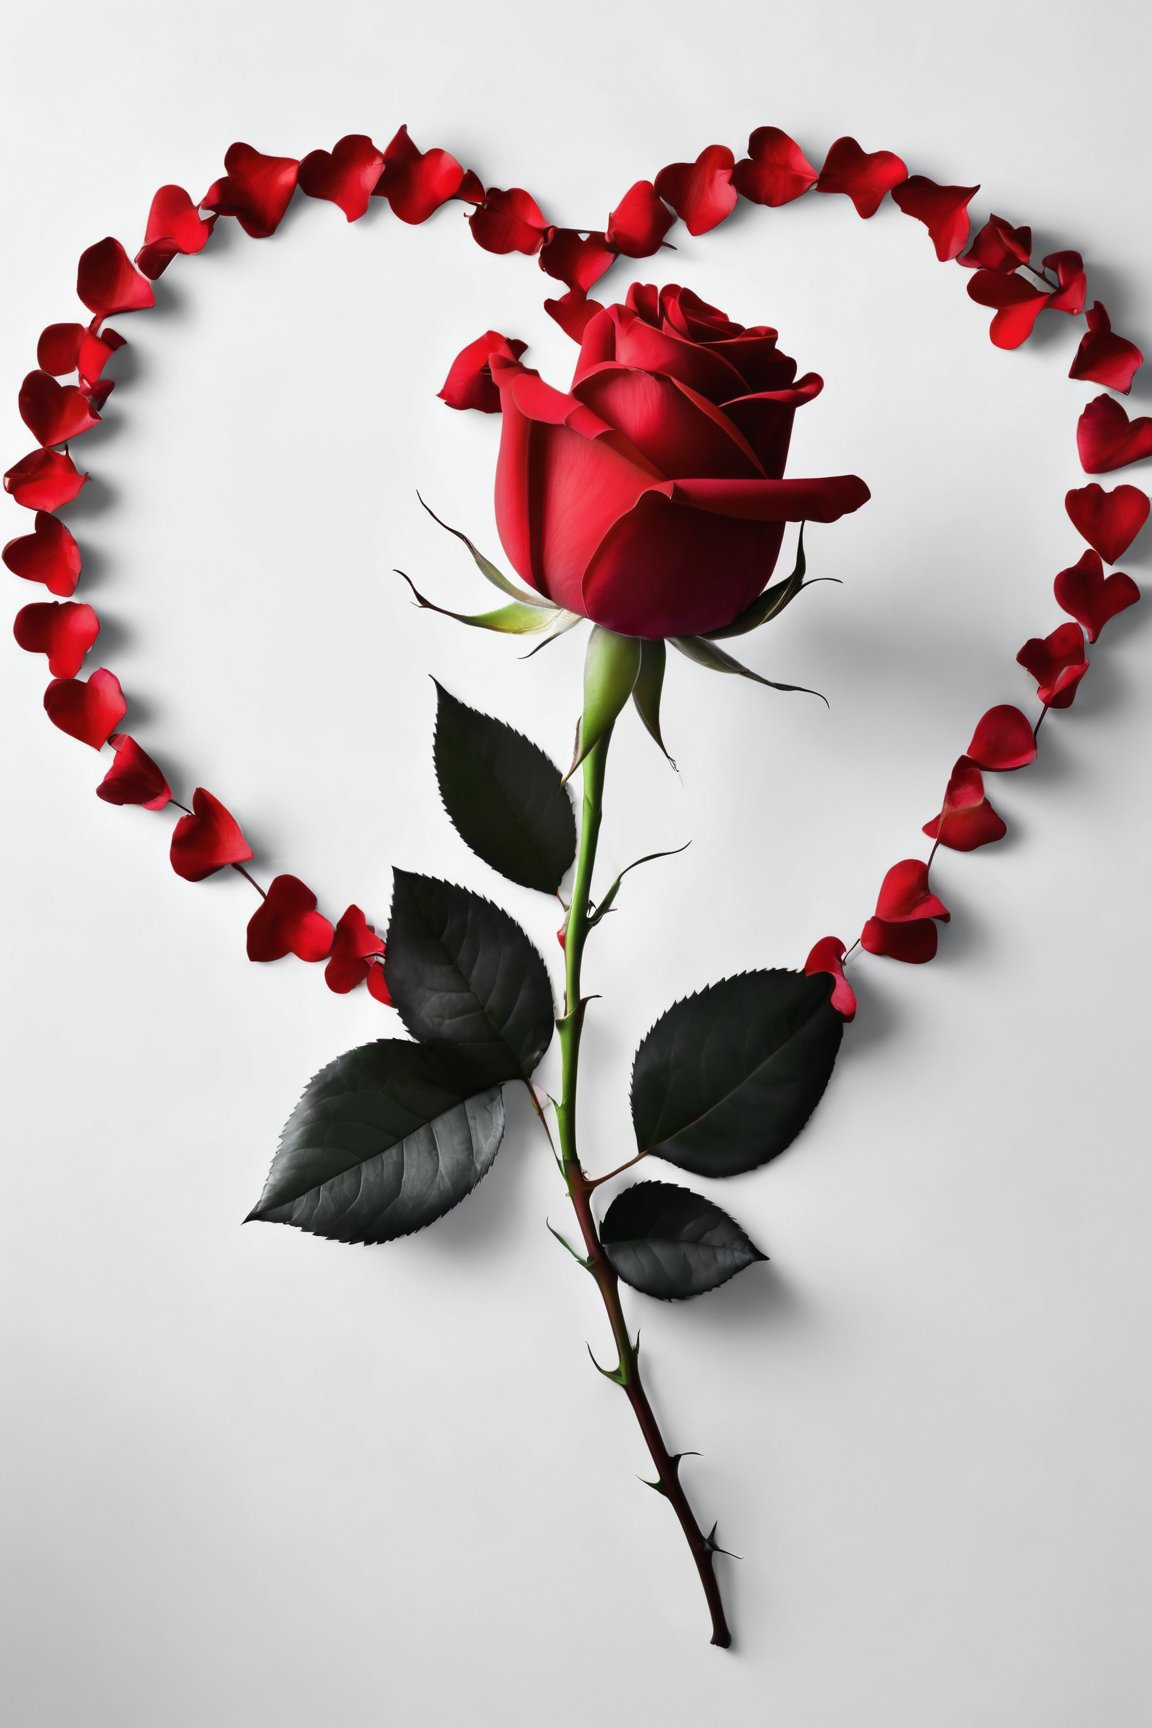 (best quality,8K,highres,masterpiece), ultra-detailed, capturing the essence of Valentine's Day through the symbolism of a single red rose. This artwork focuses on the beauty and complexity of love, represented by the vivid red flower, its delicate petals unfurling around a heart shape. The rose, set against a minimalist backdrop, stands out with its rich color and intricate details, from the soft texture of its petals to the sharp contrast of its thorns, symbolizing the beauty and challenges of love. The plant is not just a flower but a powerful emblem of passion and romance, making it a perfect tribute to Valentine's Day without the need for human figures, emphasizing the universal language of flowers in expressing deep emotions.